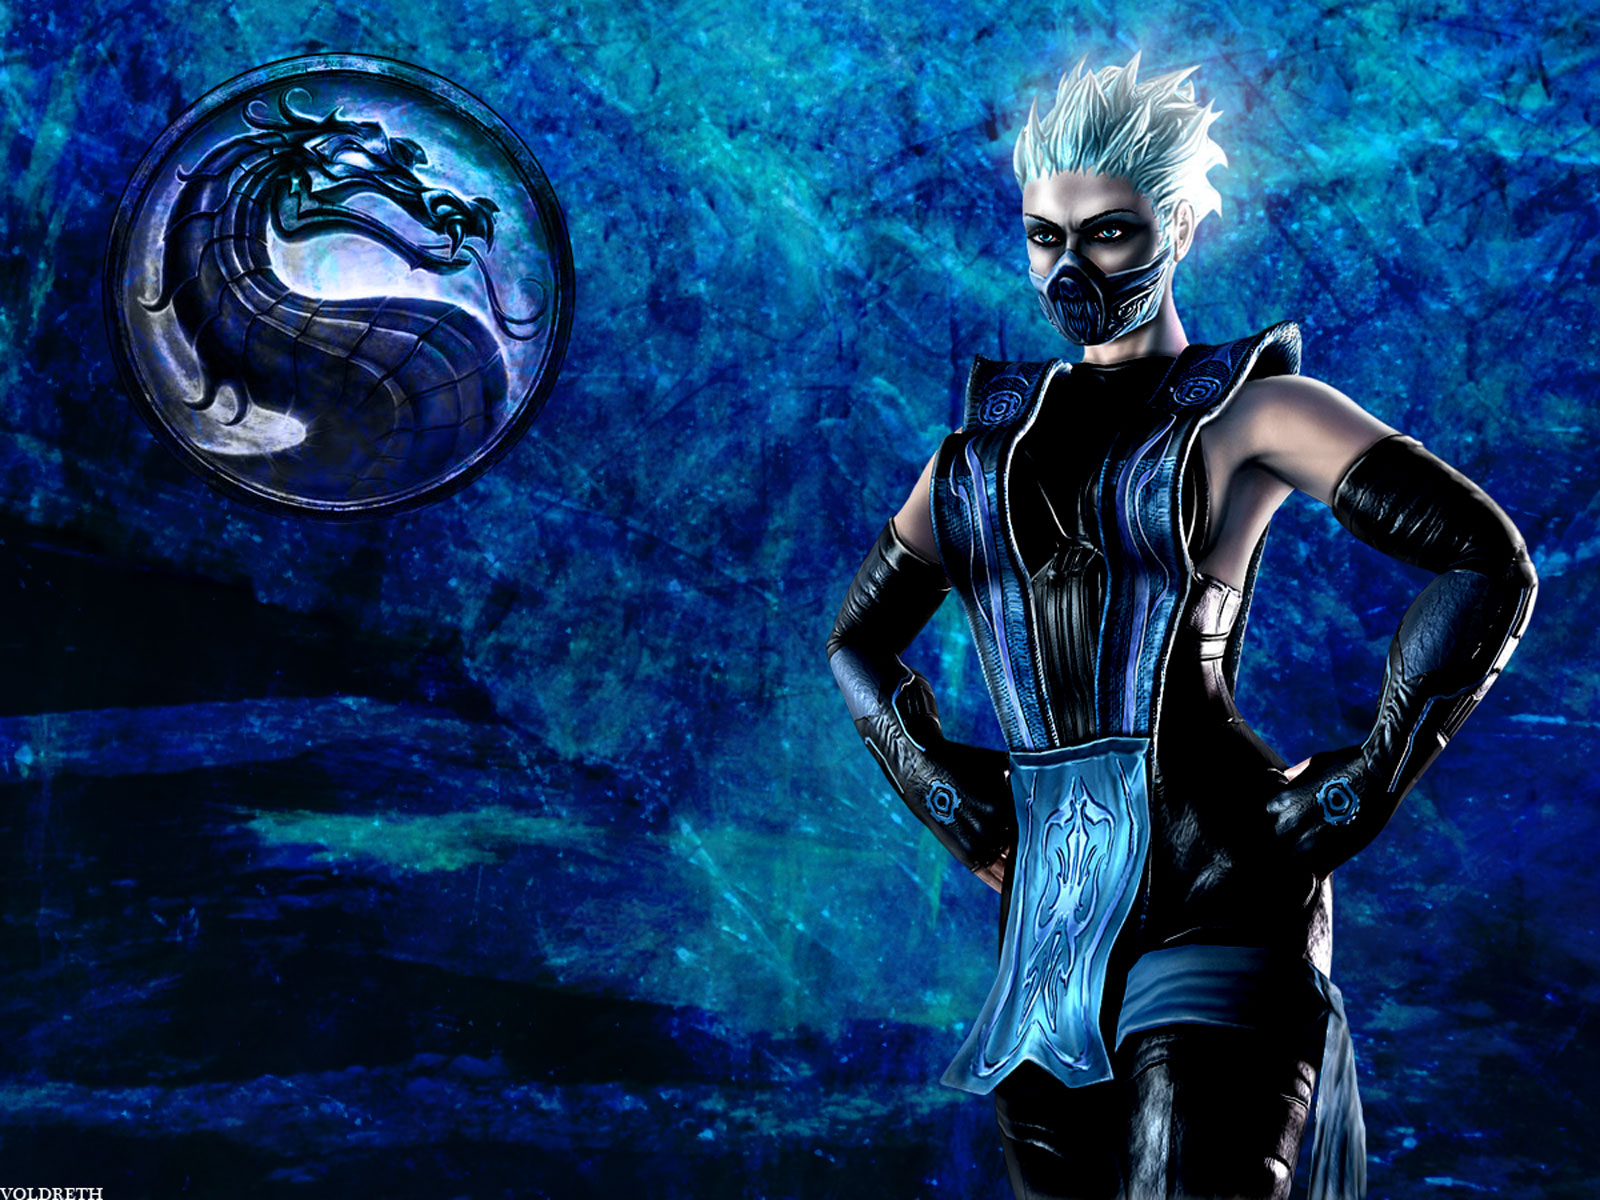 Frost from Mortal kombat by Zupano on DeviantArt